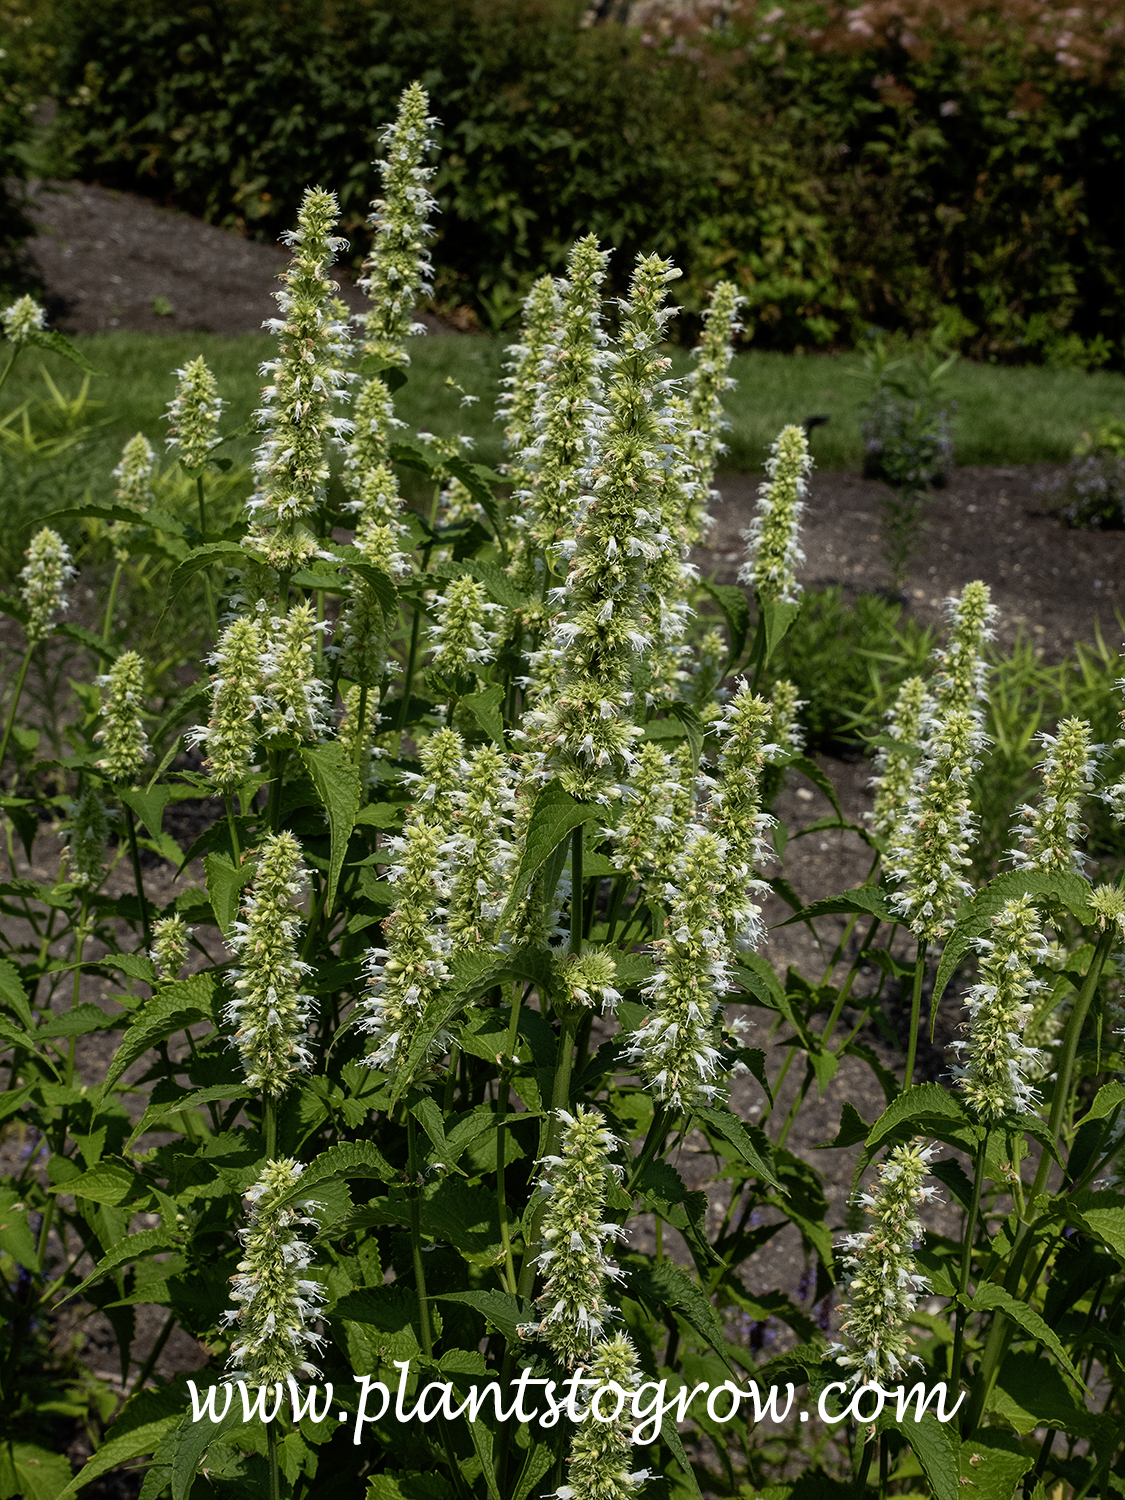 White Anise Hyssop (Agastache foeniculum Alba)
All pictures taken mid to late June.